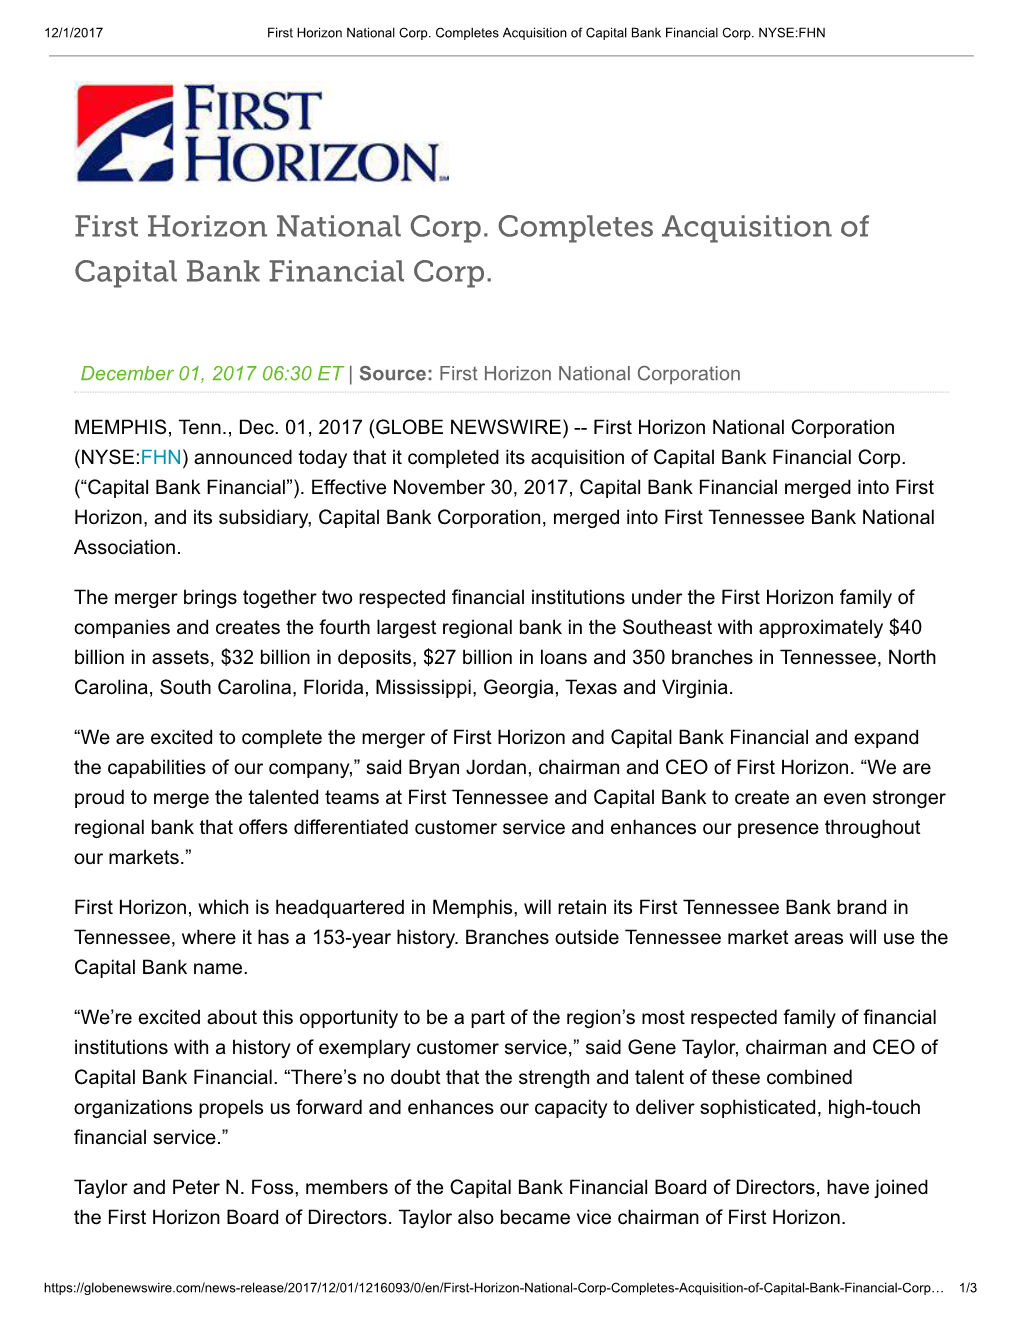 First Horizon National Corp. Completes Acquisition of Capital Bank Financial Corp